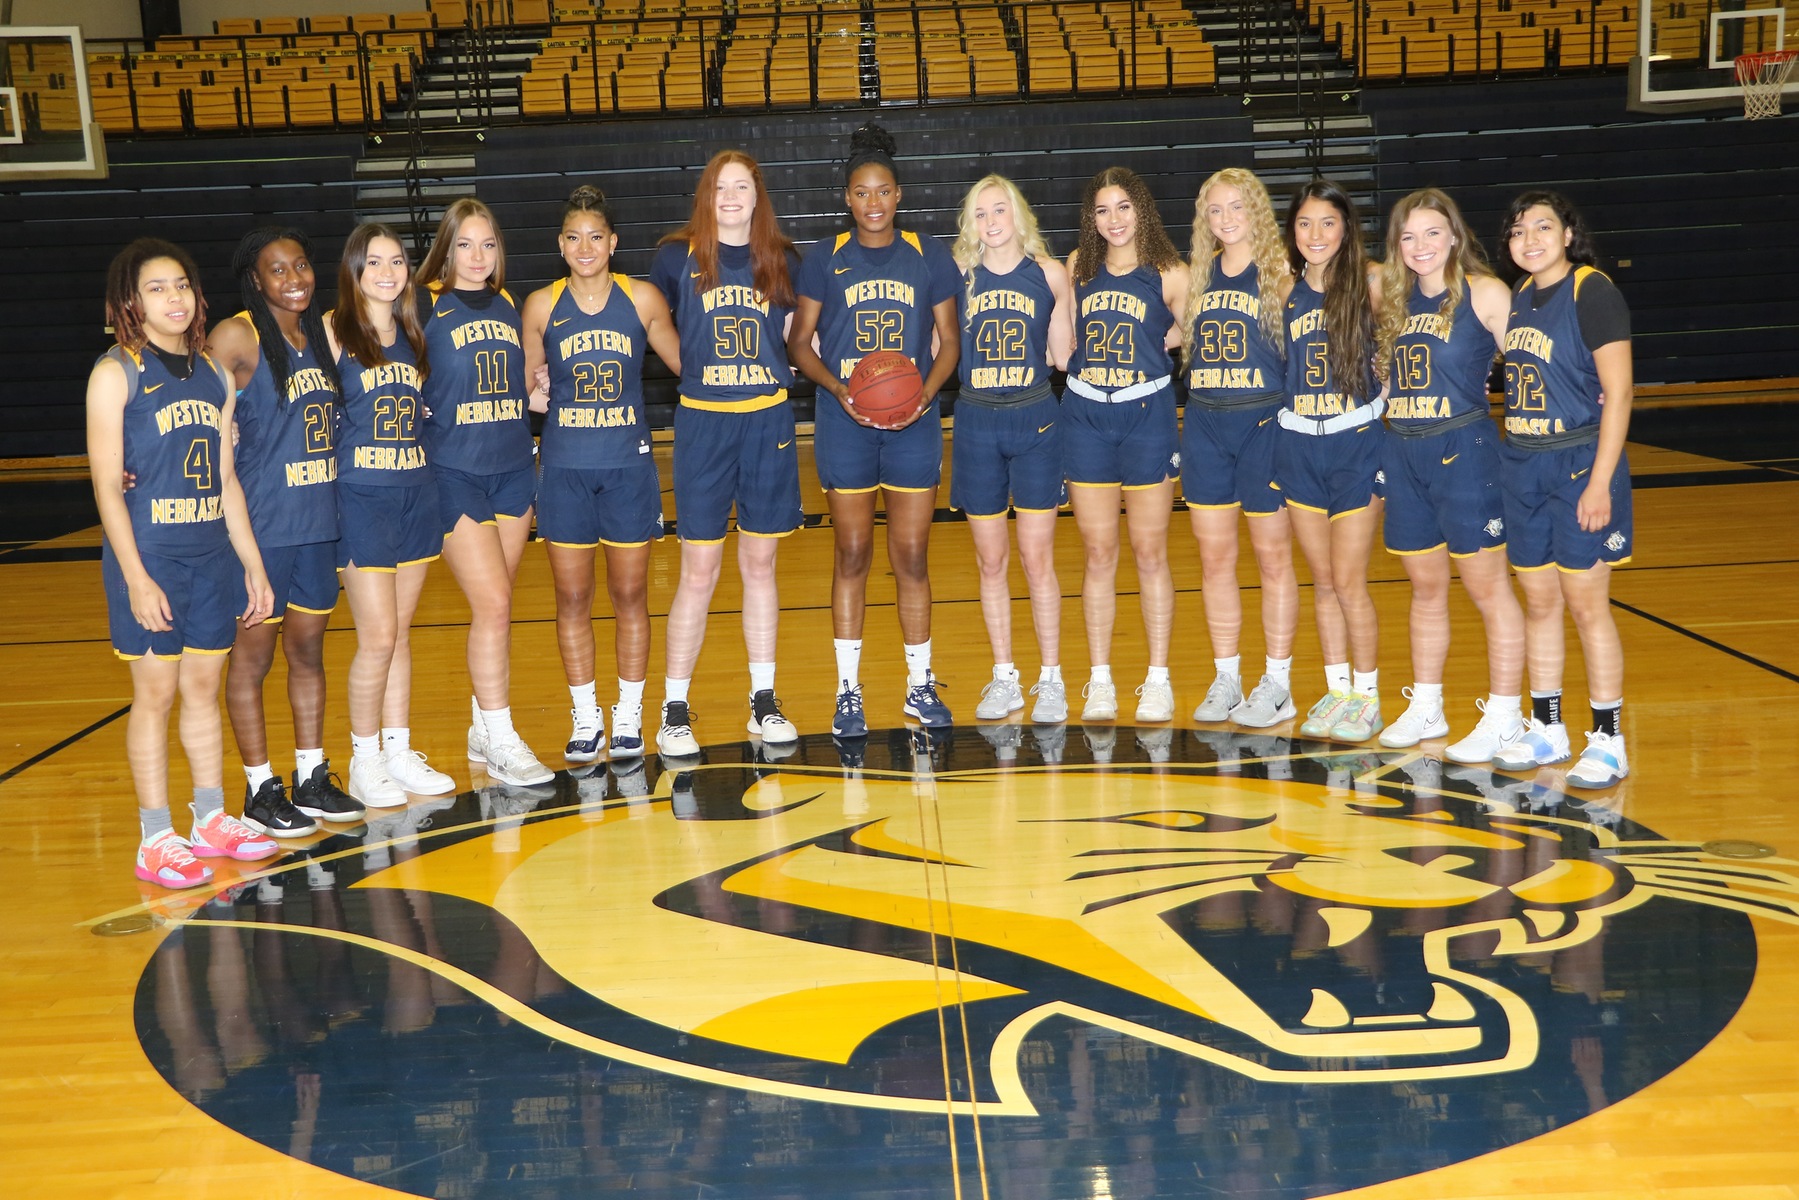 WNCC women earn 16th seed at national tourney